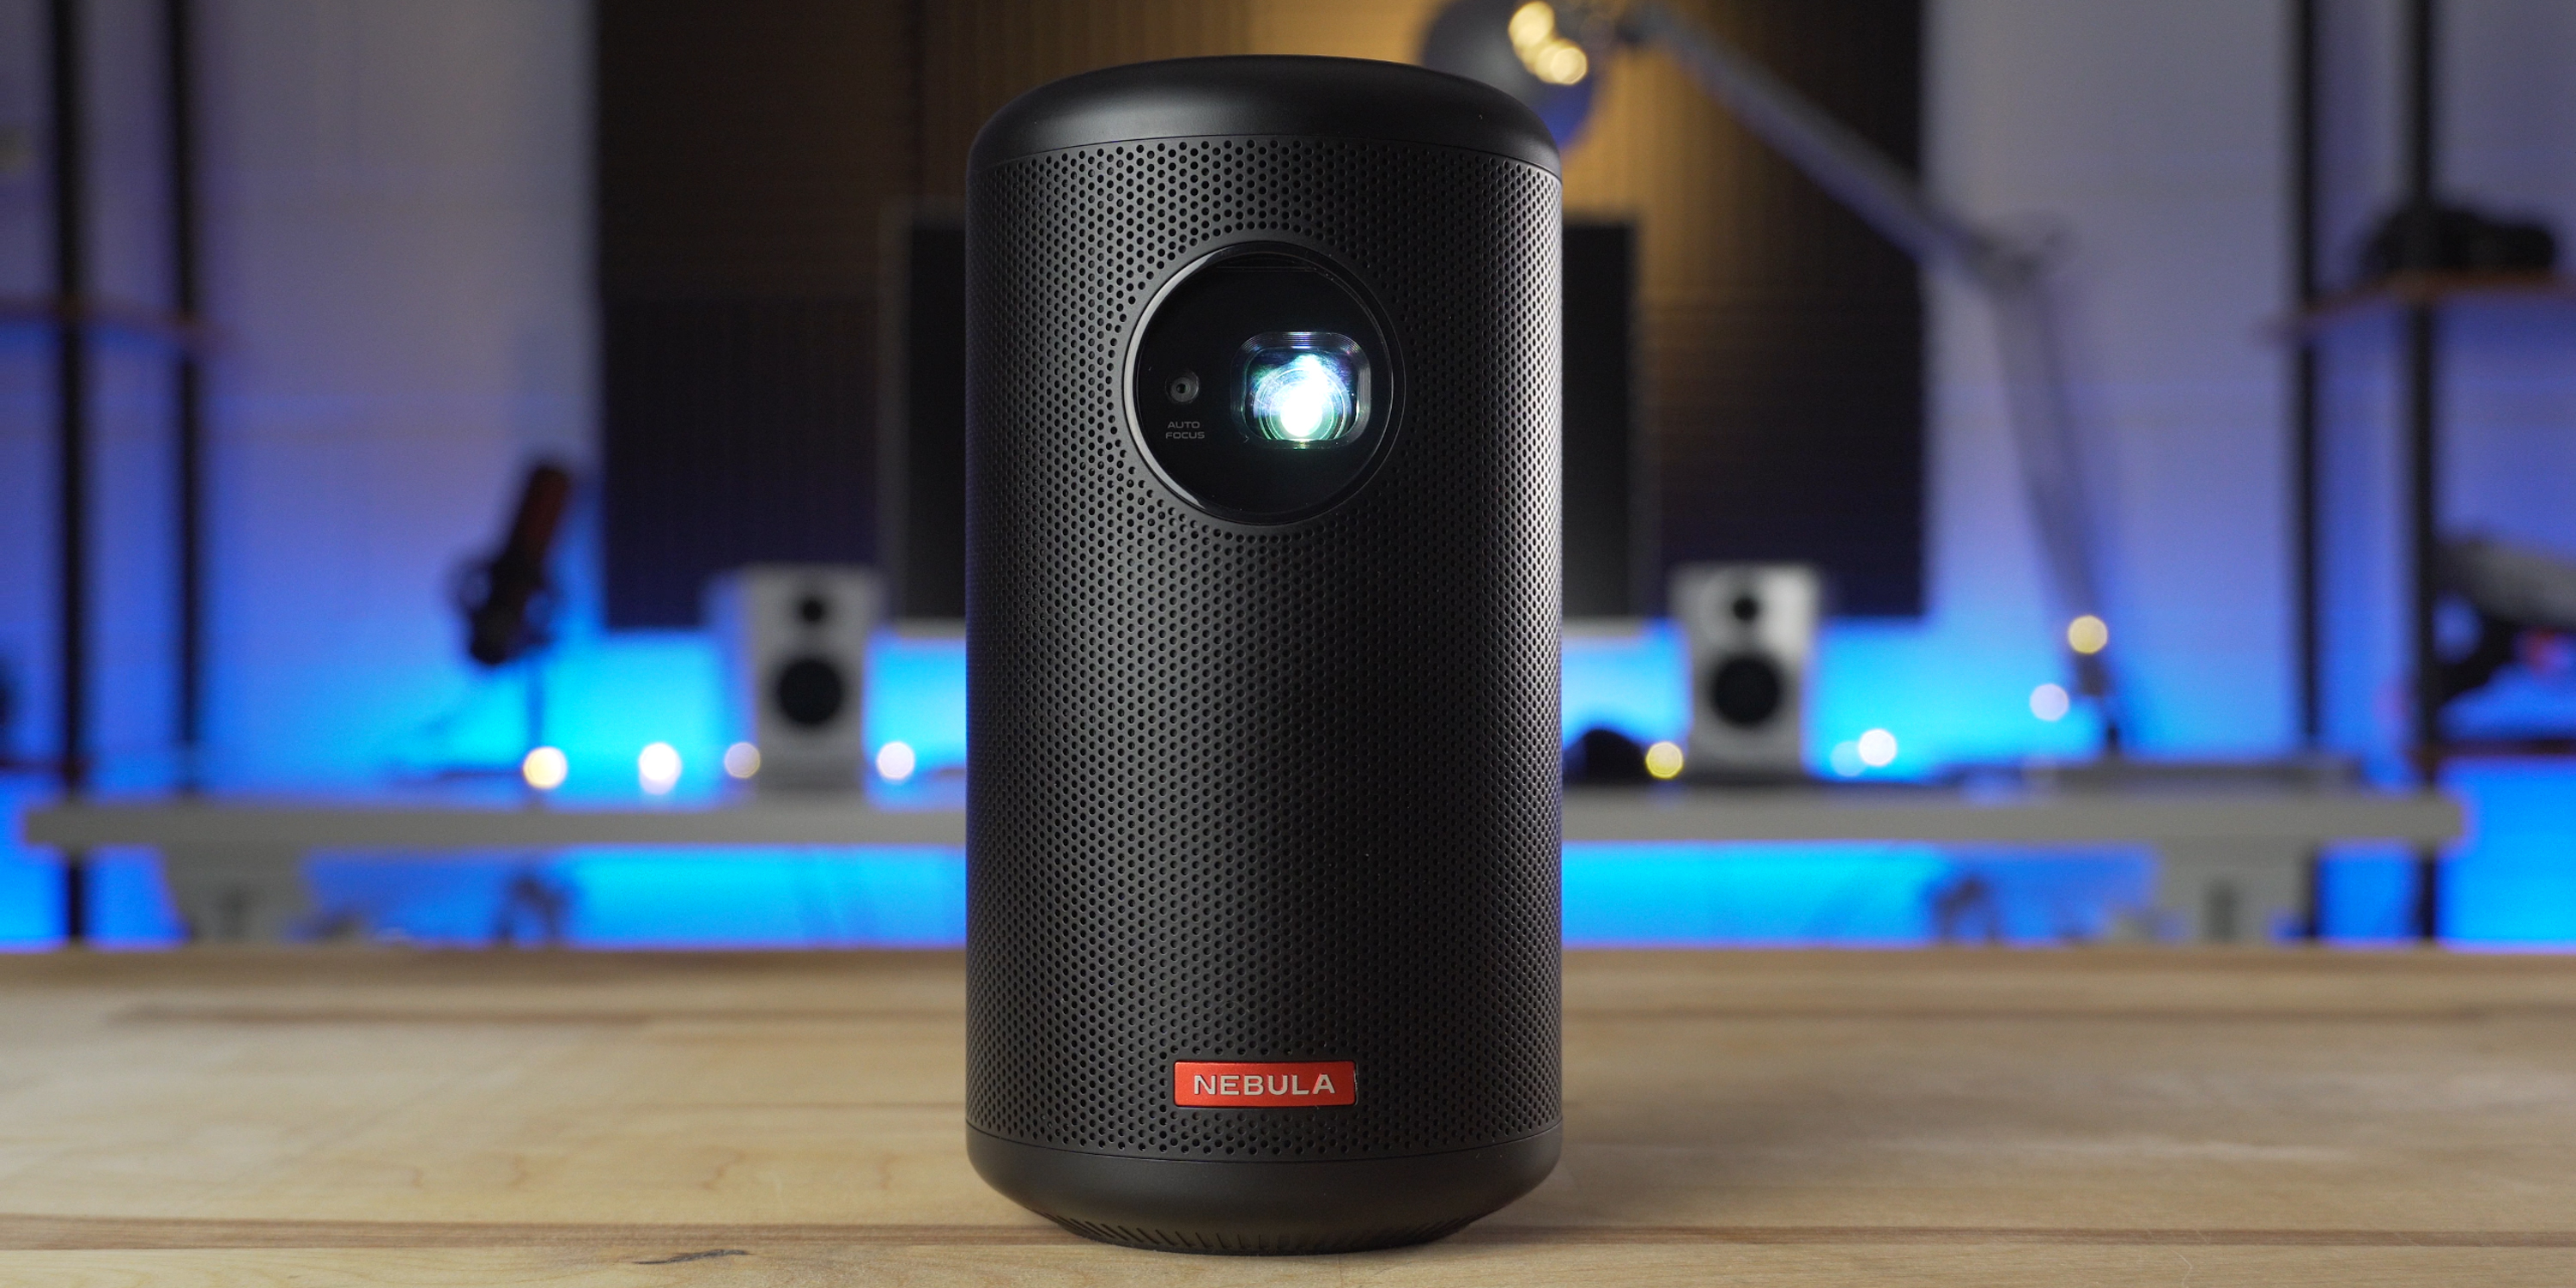 Anker's popular Nebula Capsule II portable projector sees Gold Box